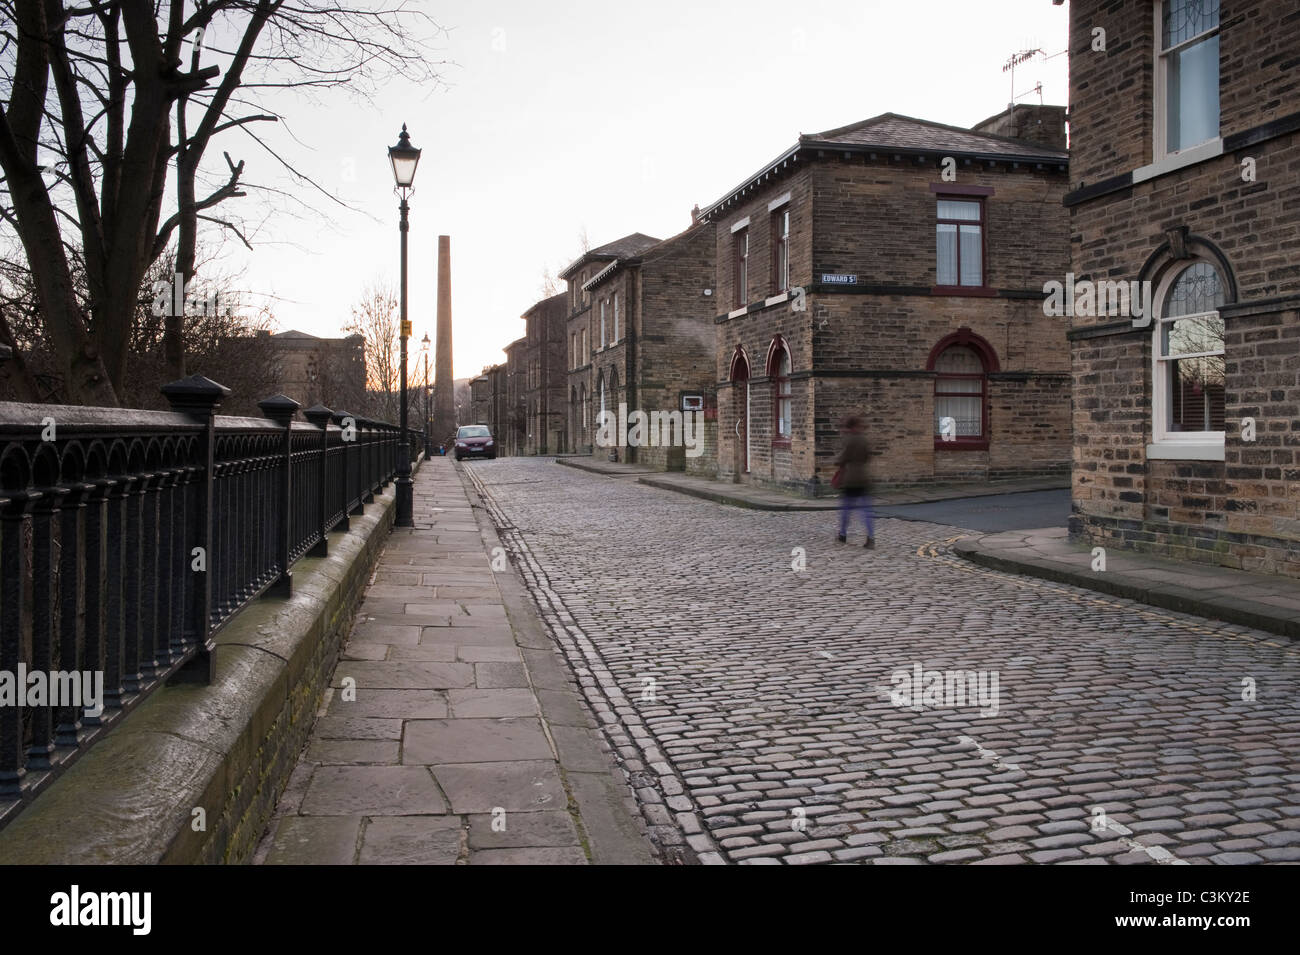 Albert Terrace in historic Saltaire village (end terraced properties, Victorian houses, stone setts on road, mill chimney) - Bradford, Yorkshire, UK. Stock Photo